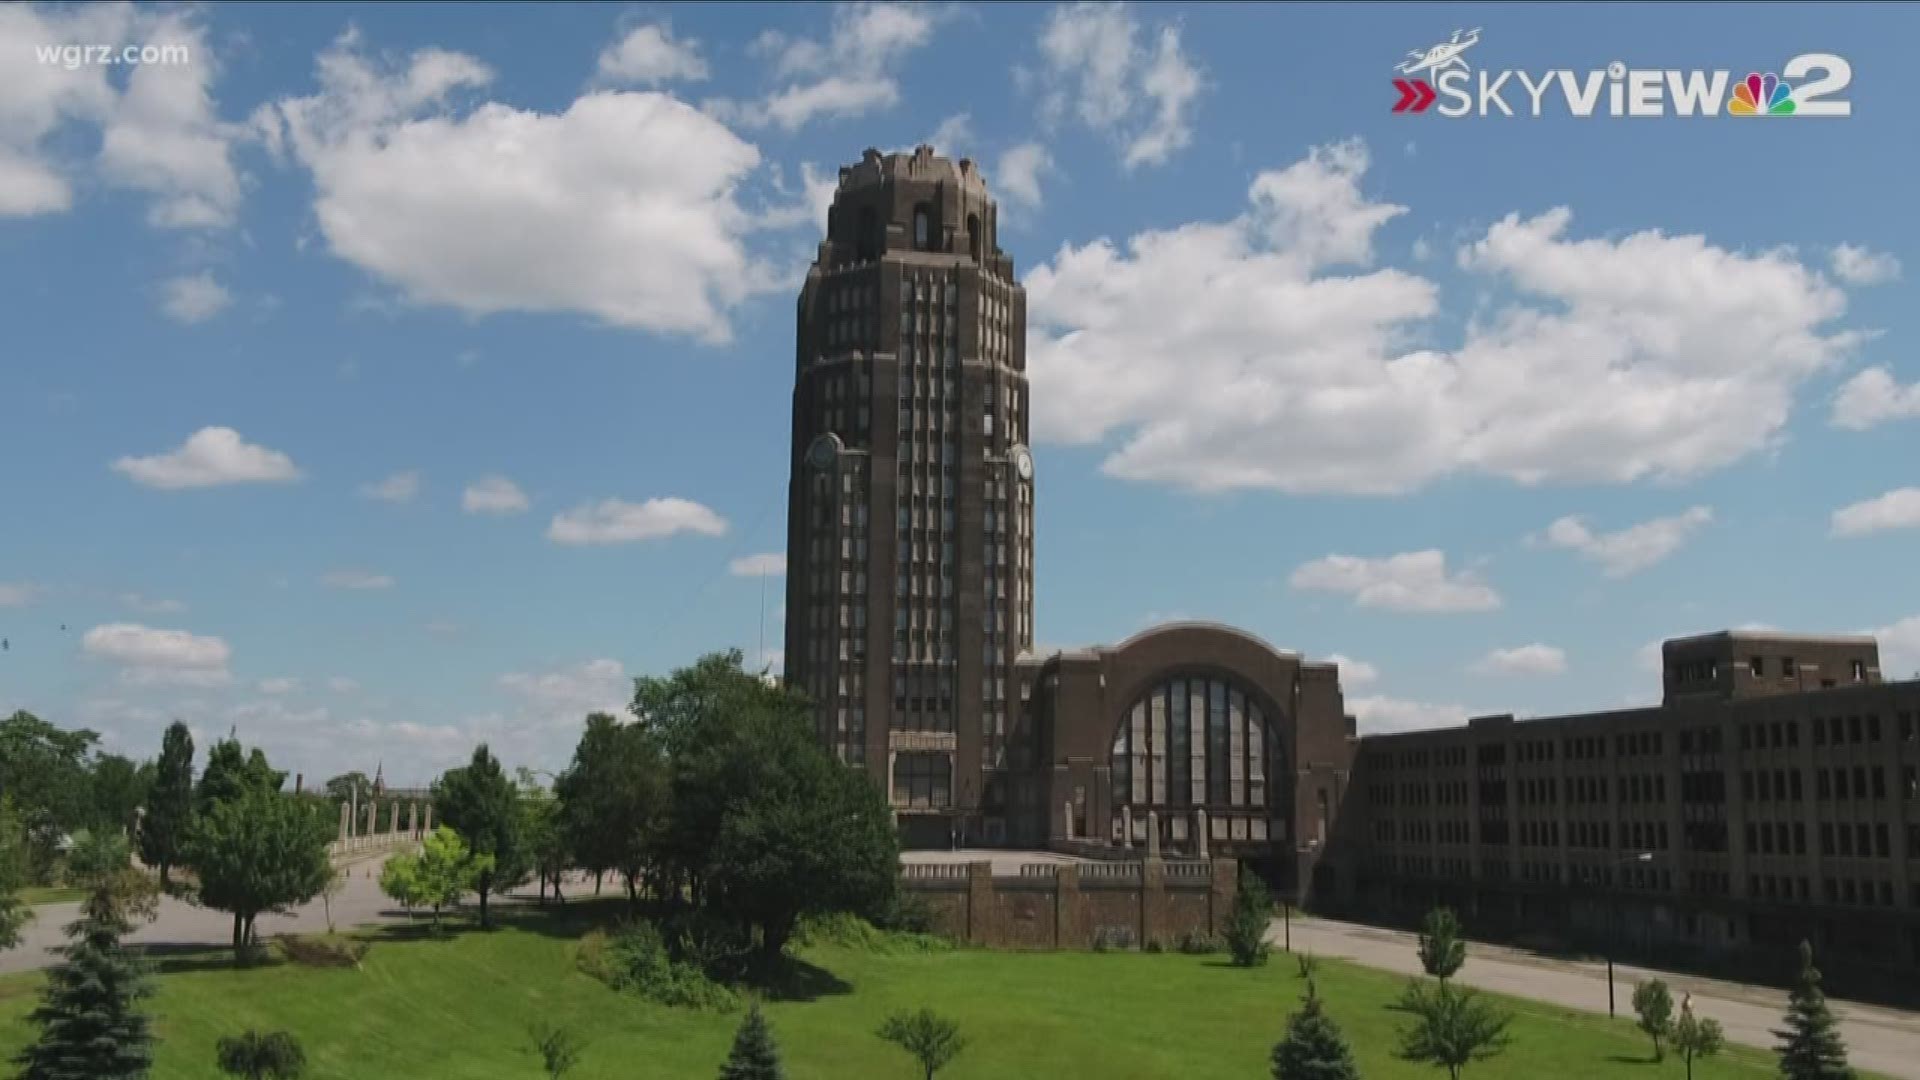 Updates Coming To Buffalo Central Terminal